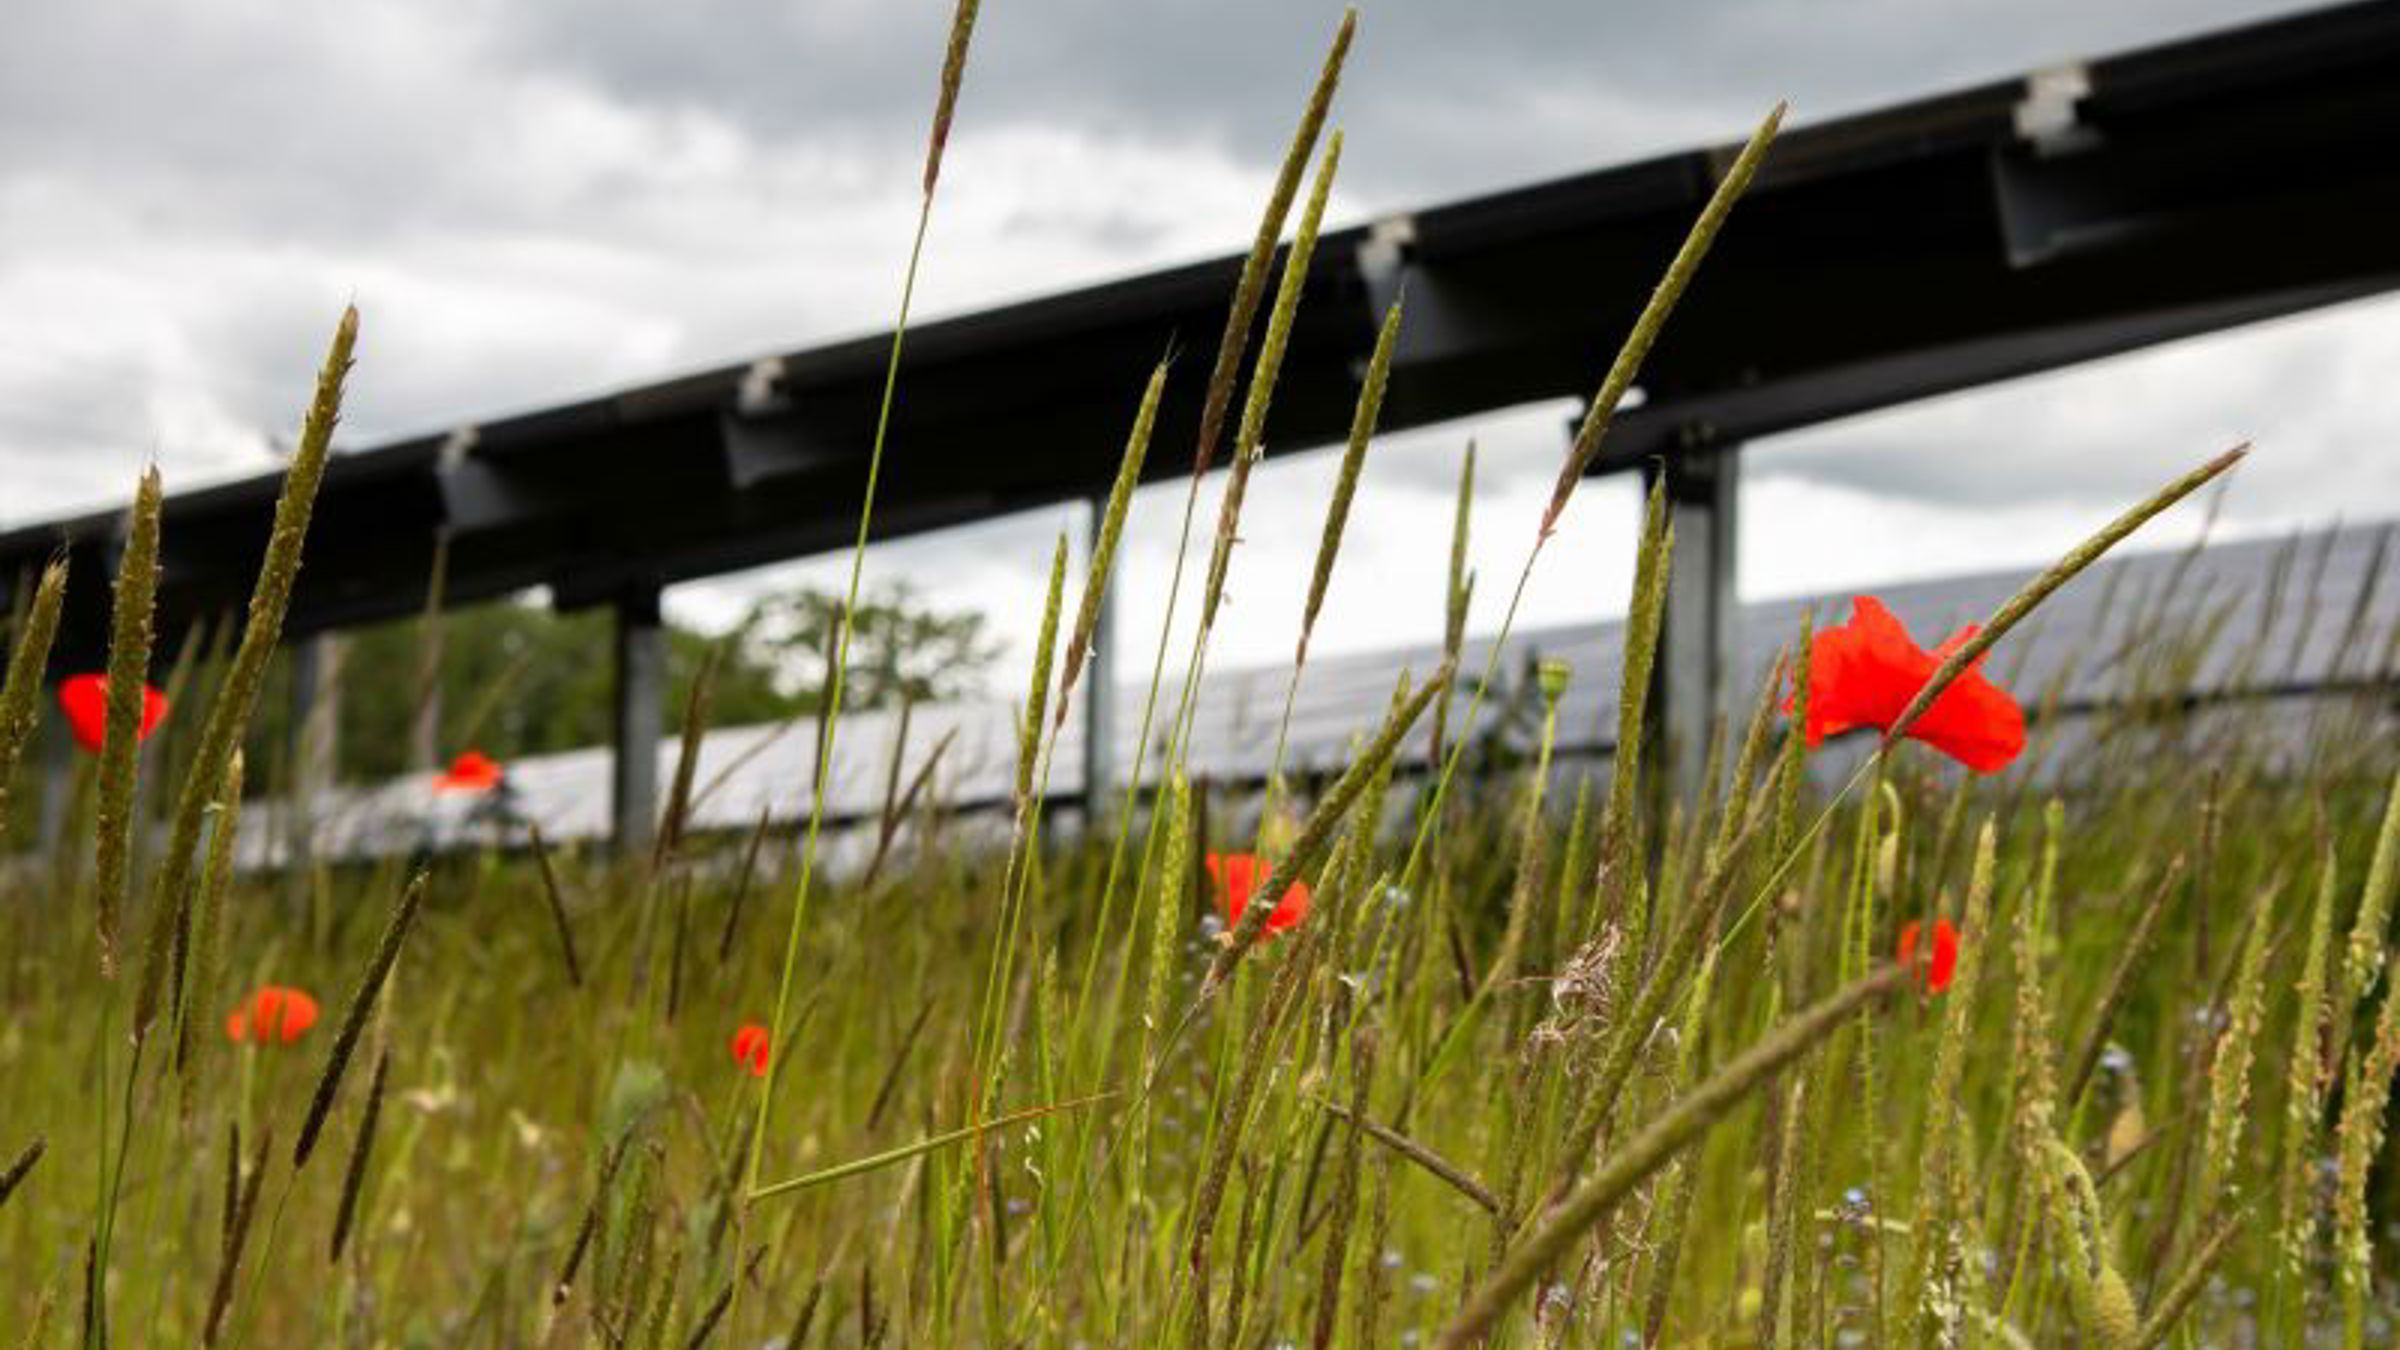 Solar panels on grass on with poppy flowers